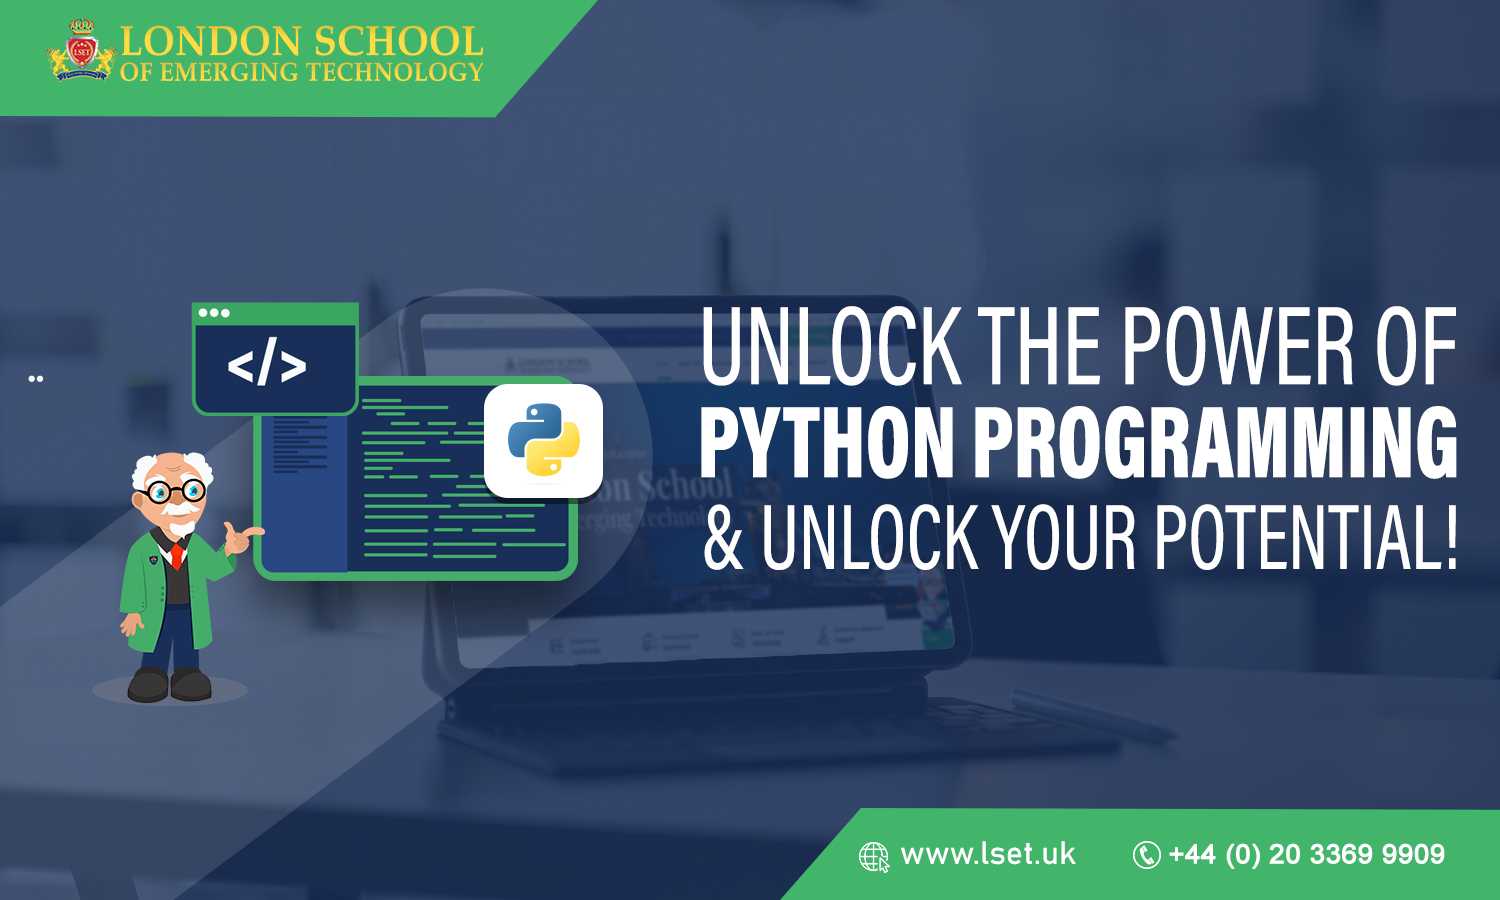 Unlock the Power of Python Programming & Unlock Your Potential!